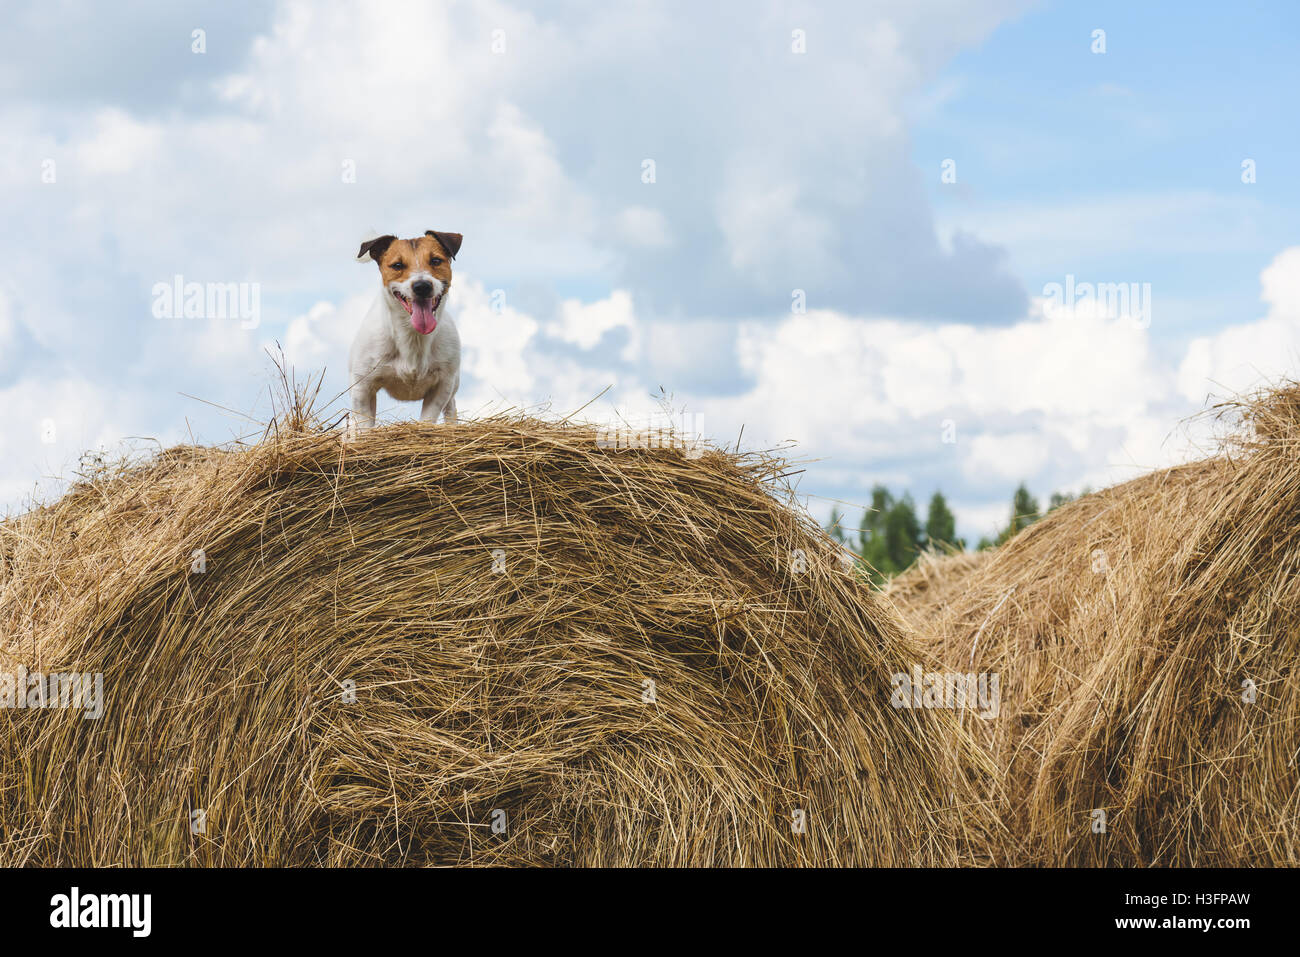 Dog standing on hay stack at farm field Stock Photo